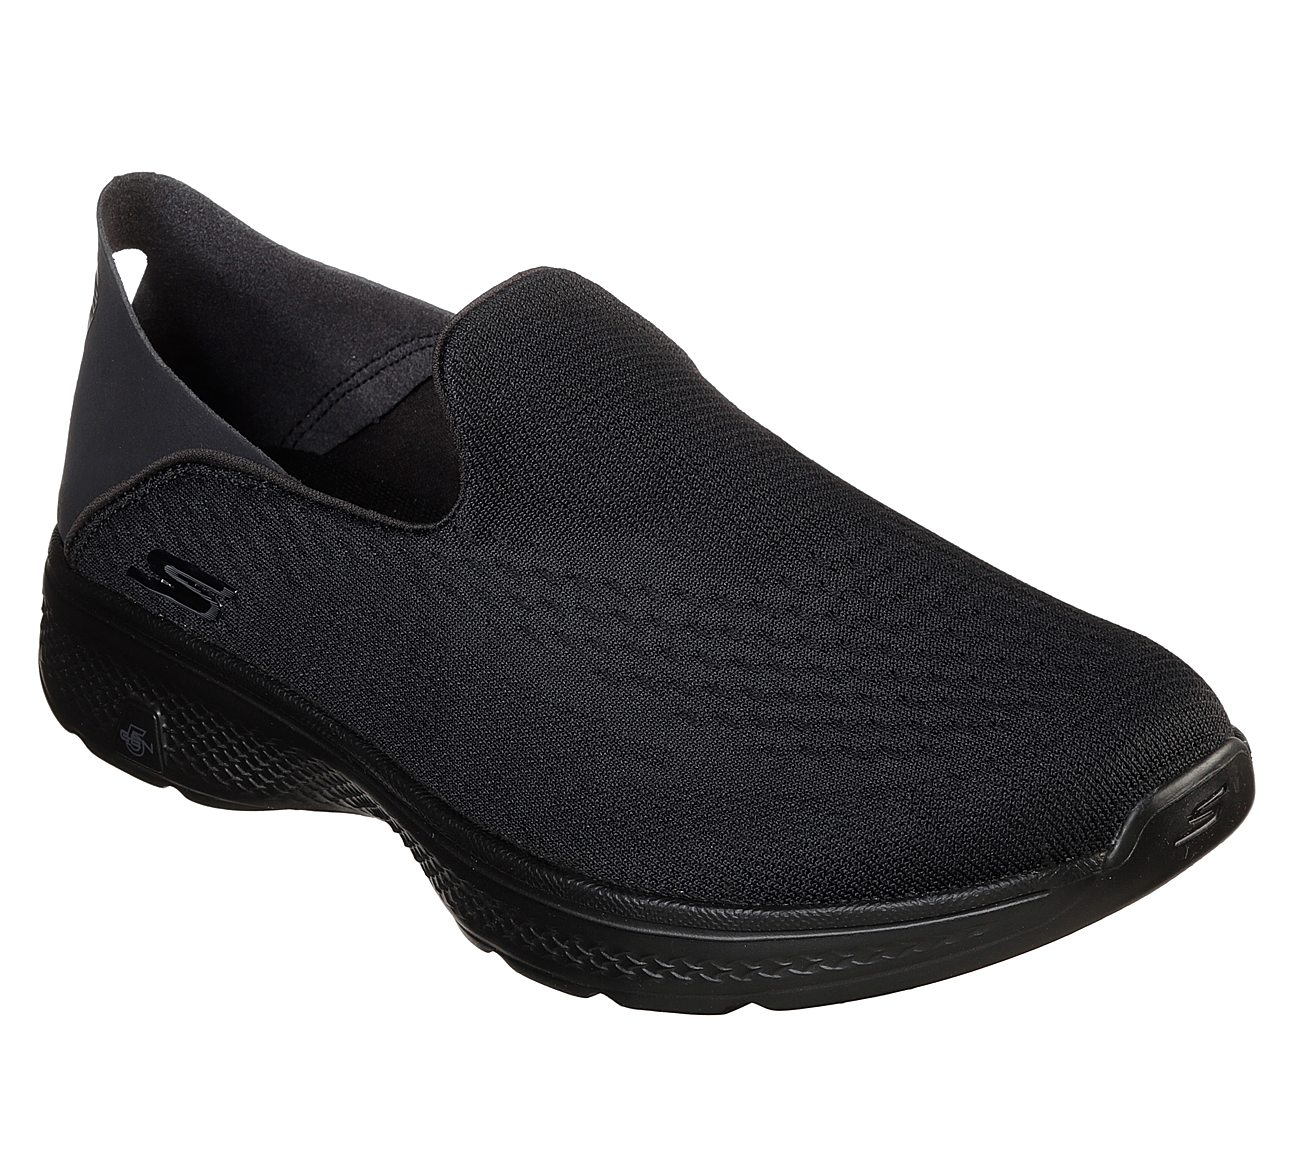 GO WALK 4- CONVERTIBLE, BBLACK Footwear Lateral View